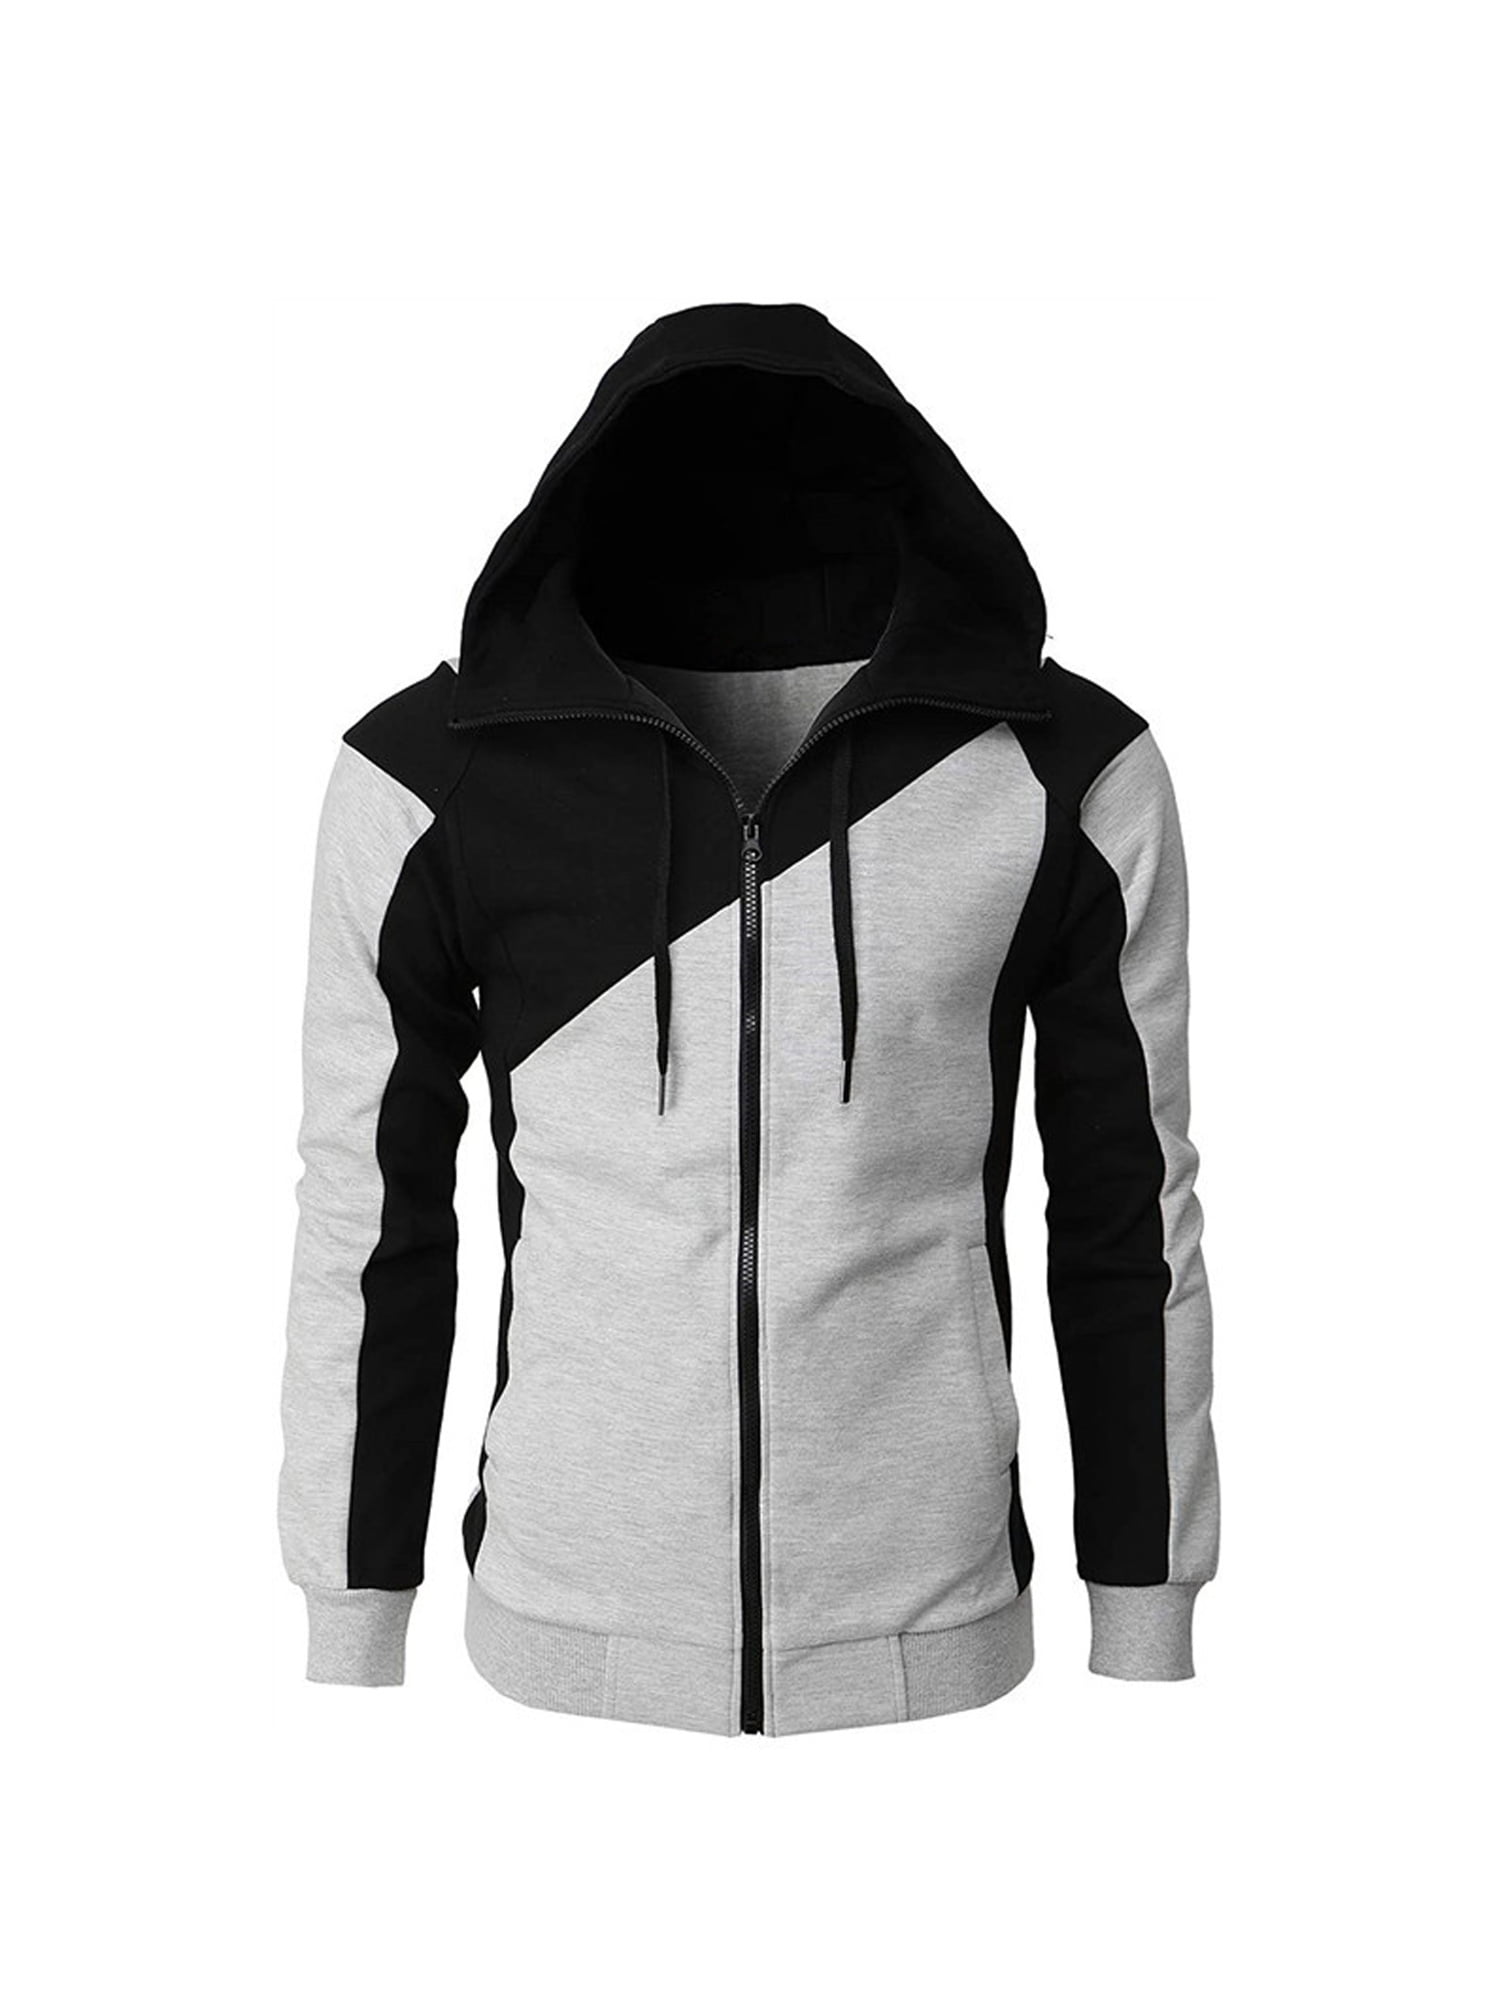 XXL Sizes: S L XL Men's Hoodies Pullover Hooded Sweatshirt Long Sleeve Color Block Patchwork Top Casual Tracksuits Hoody with Pocket Clothing Gender-Neutral Adult Clothing Hoodies & Sweatshirts Hoodies M 